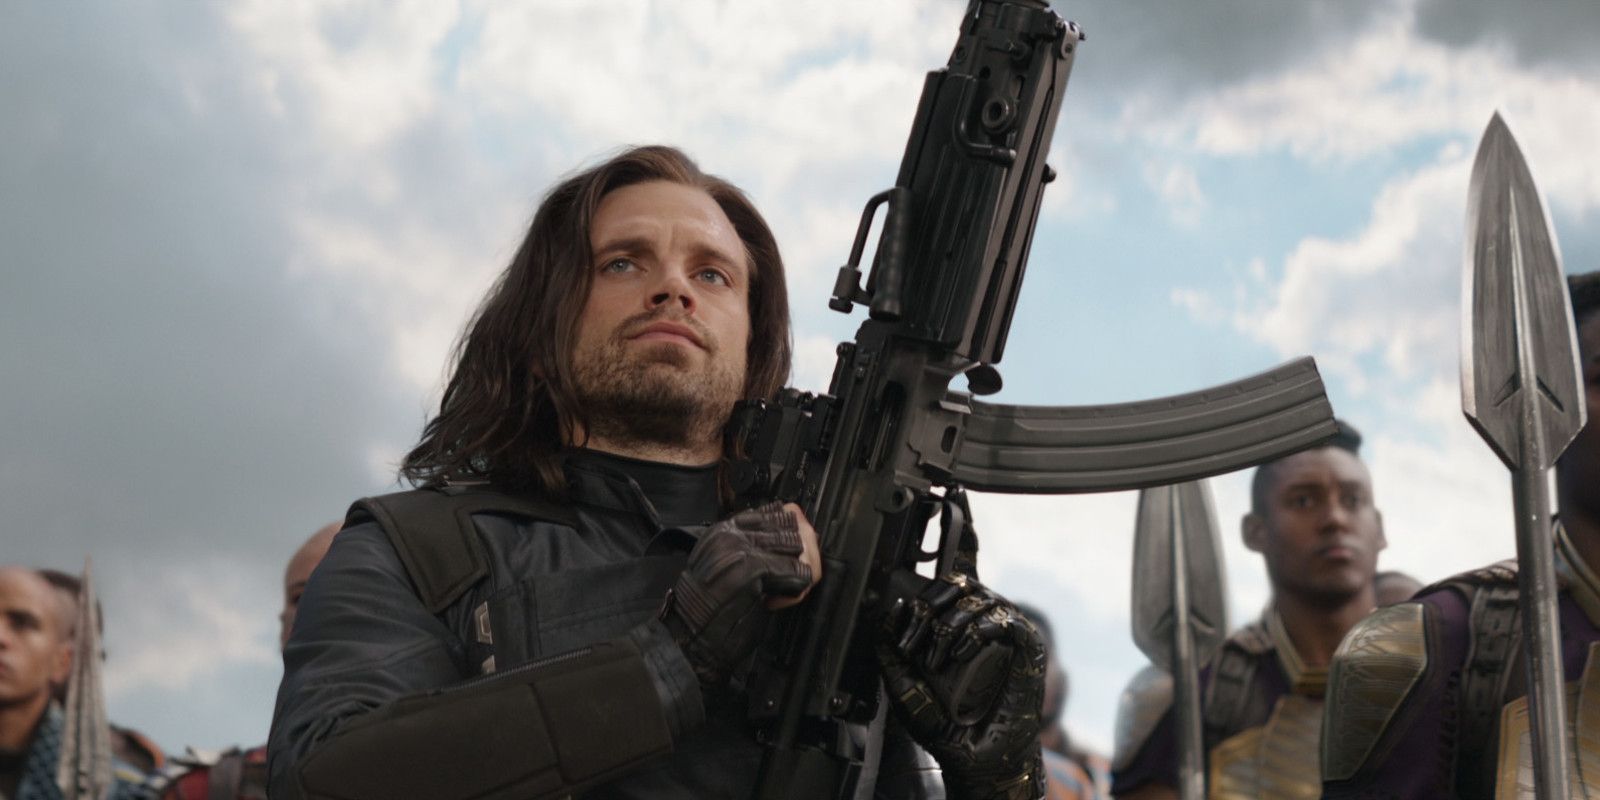 Bucky joining the fight in Avengers: Infinity War